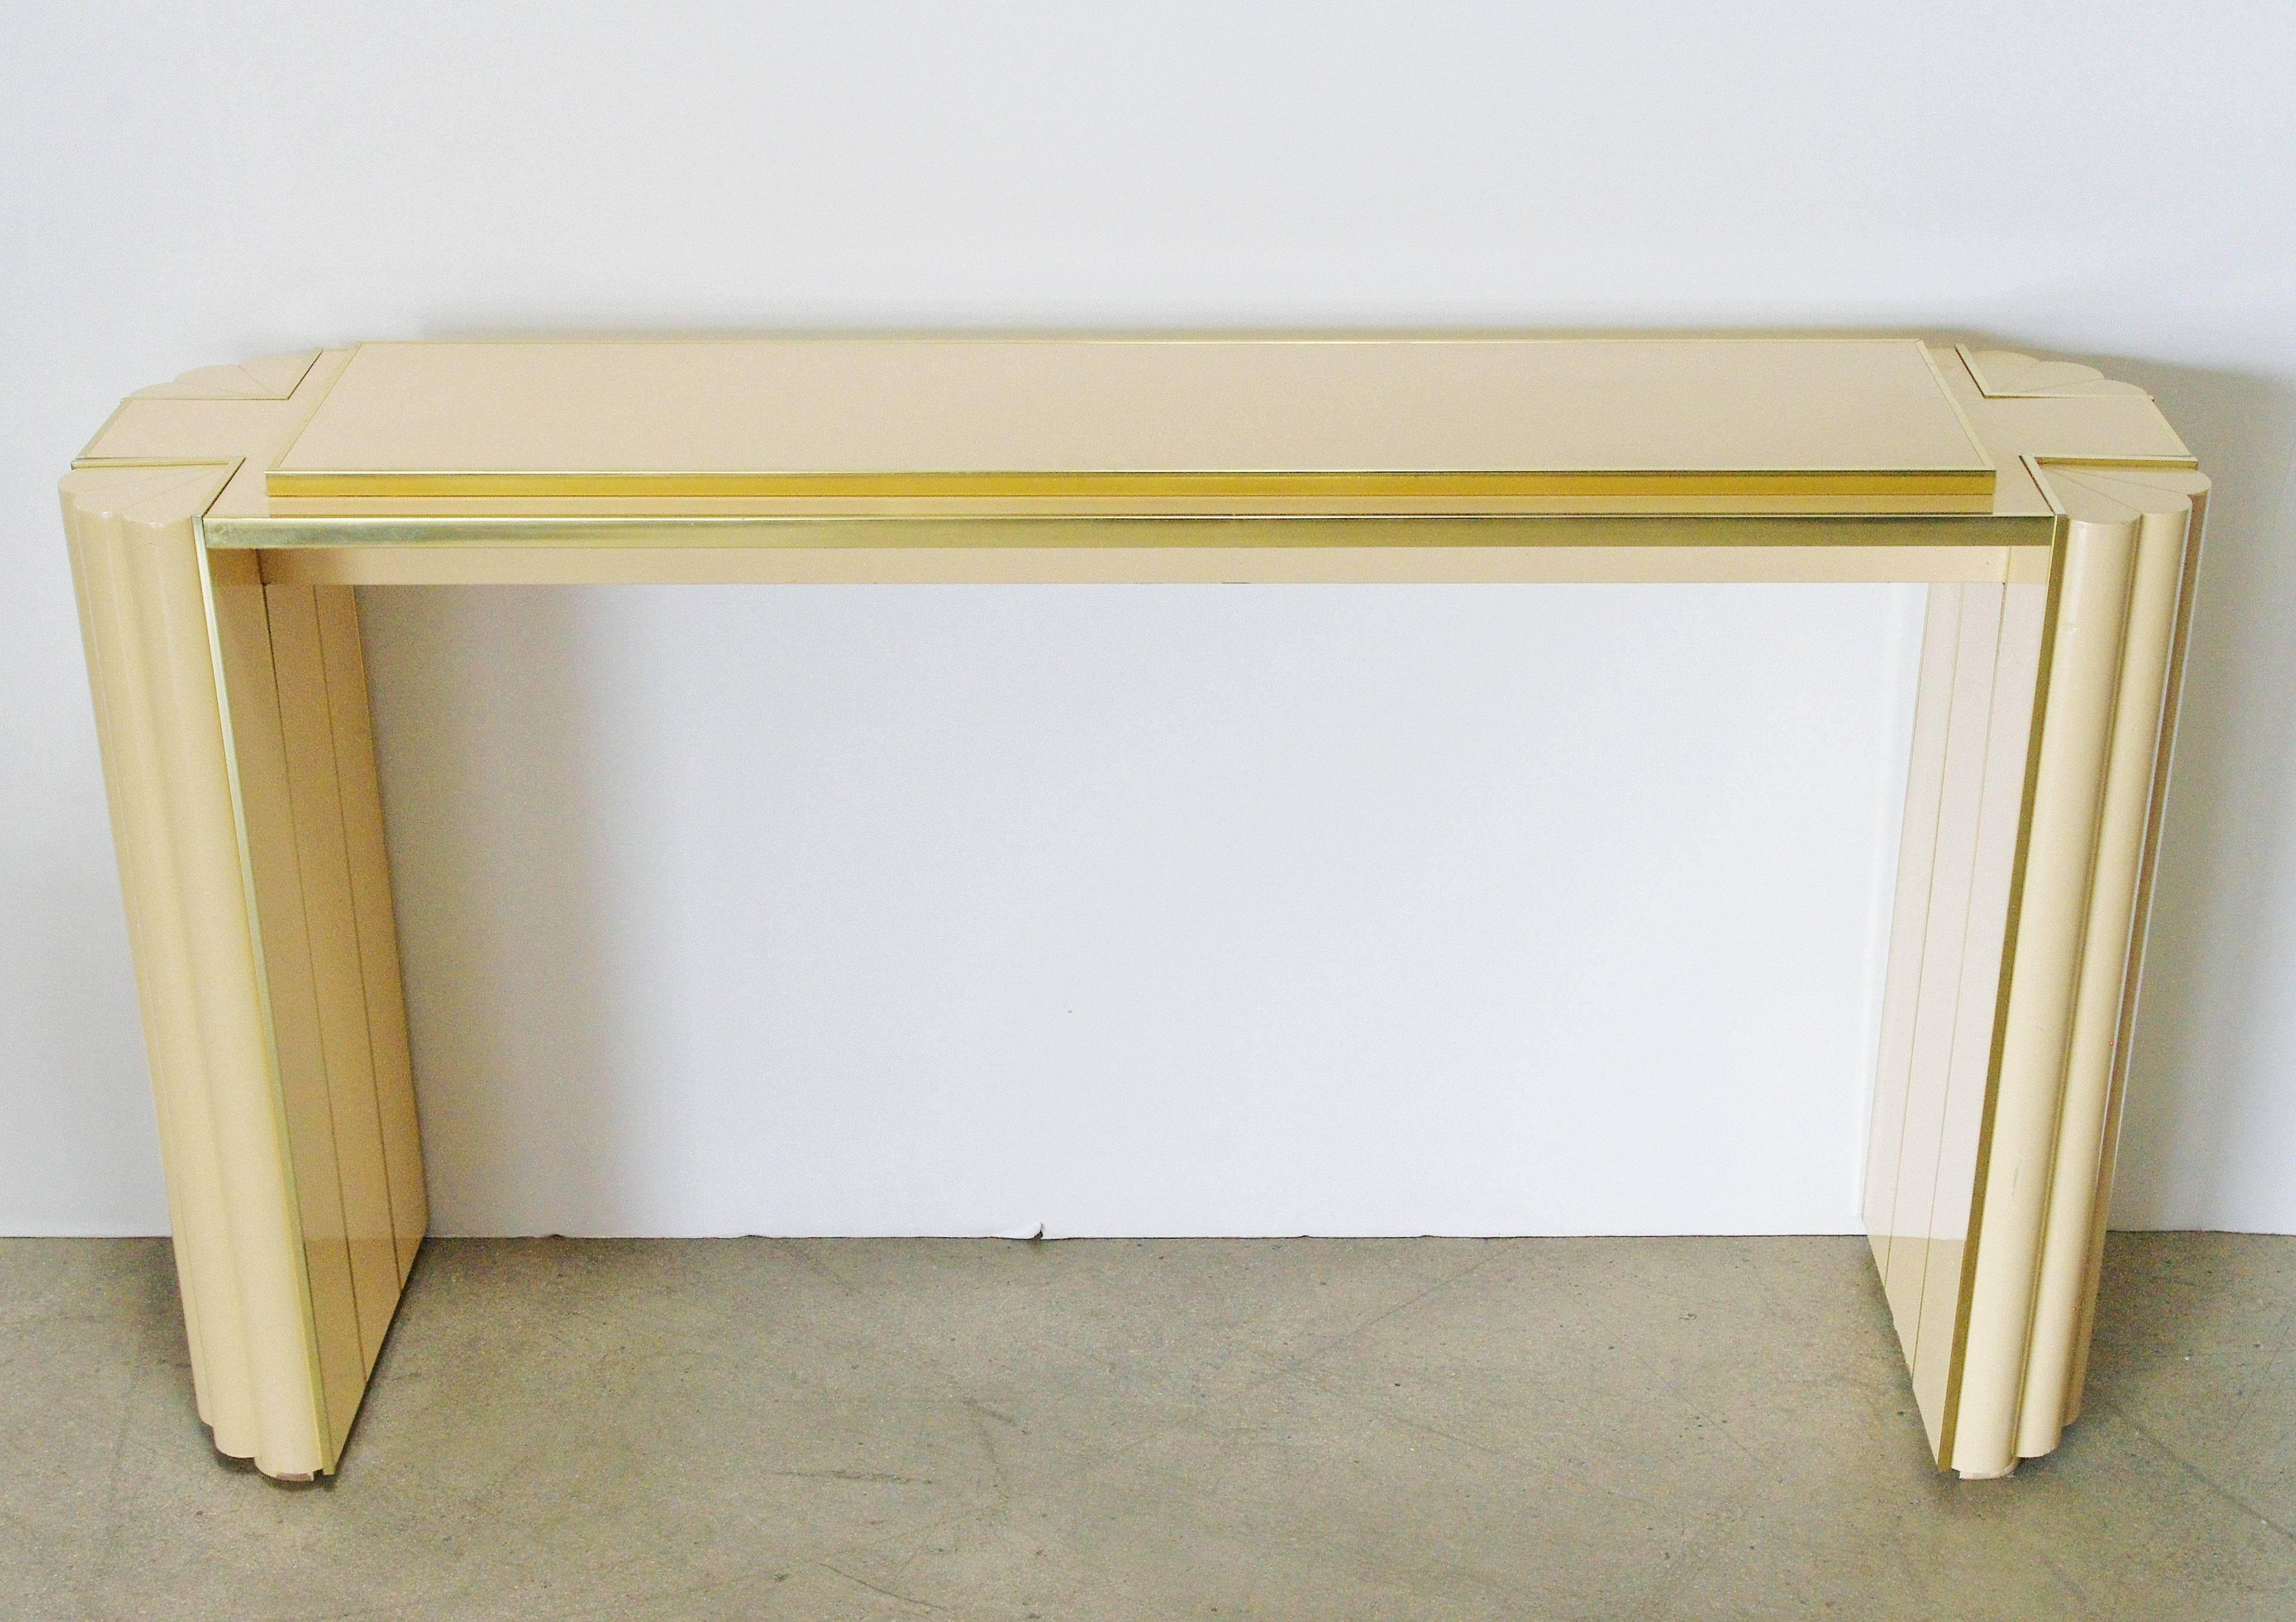 Cream lacquered wood console table with brass details designed by Alain Delon for Maison Jansen. Made in France in 1970s.
Dimensions: 30